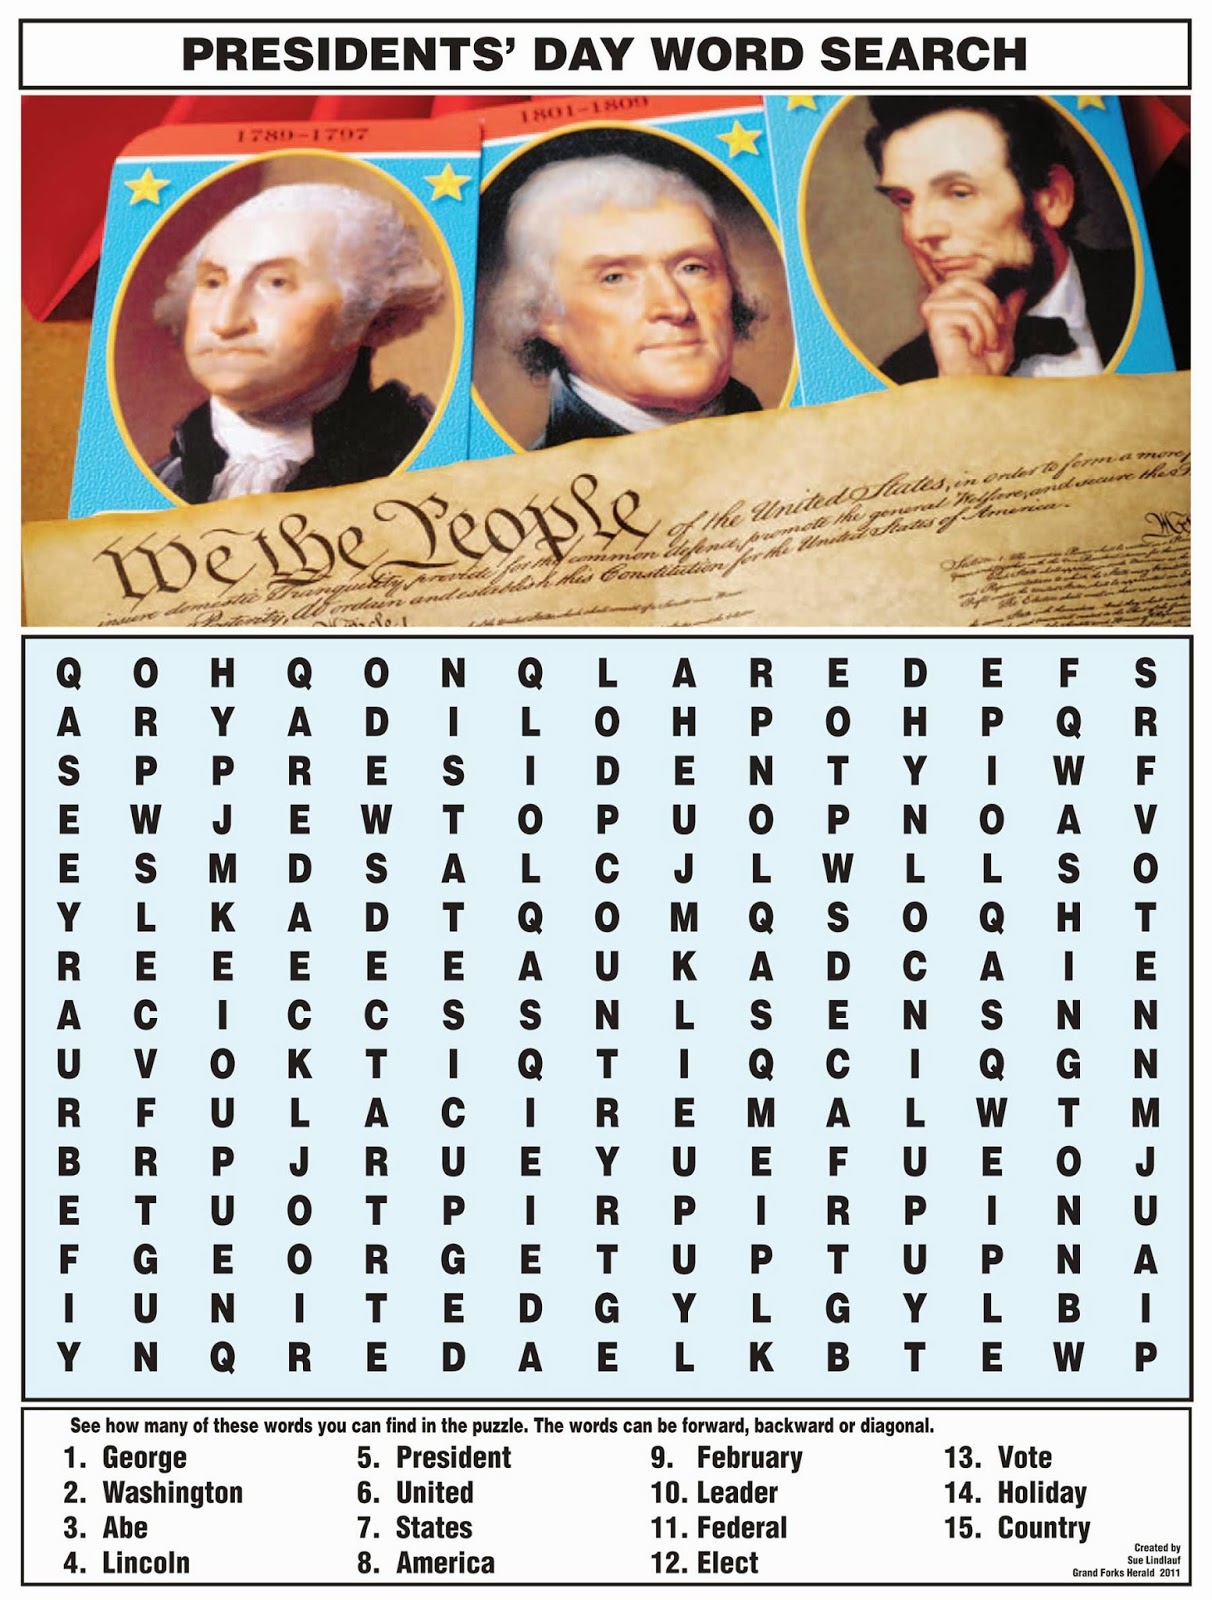 Top 7 President's Day Word Search Puzzles